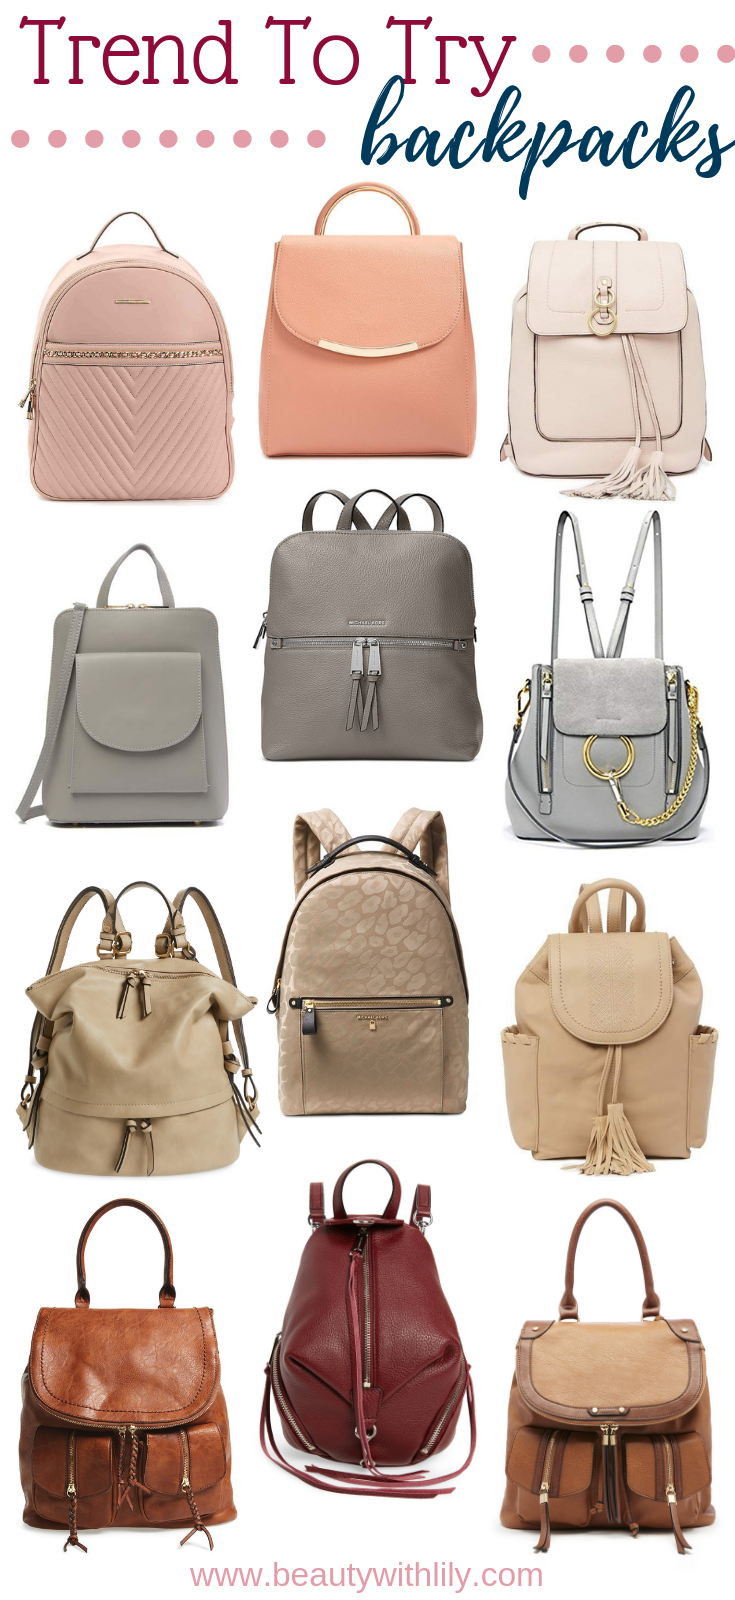 Trend To Try - Backpacks - Beauty With Lily